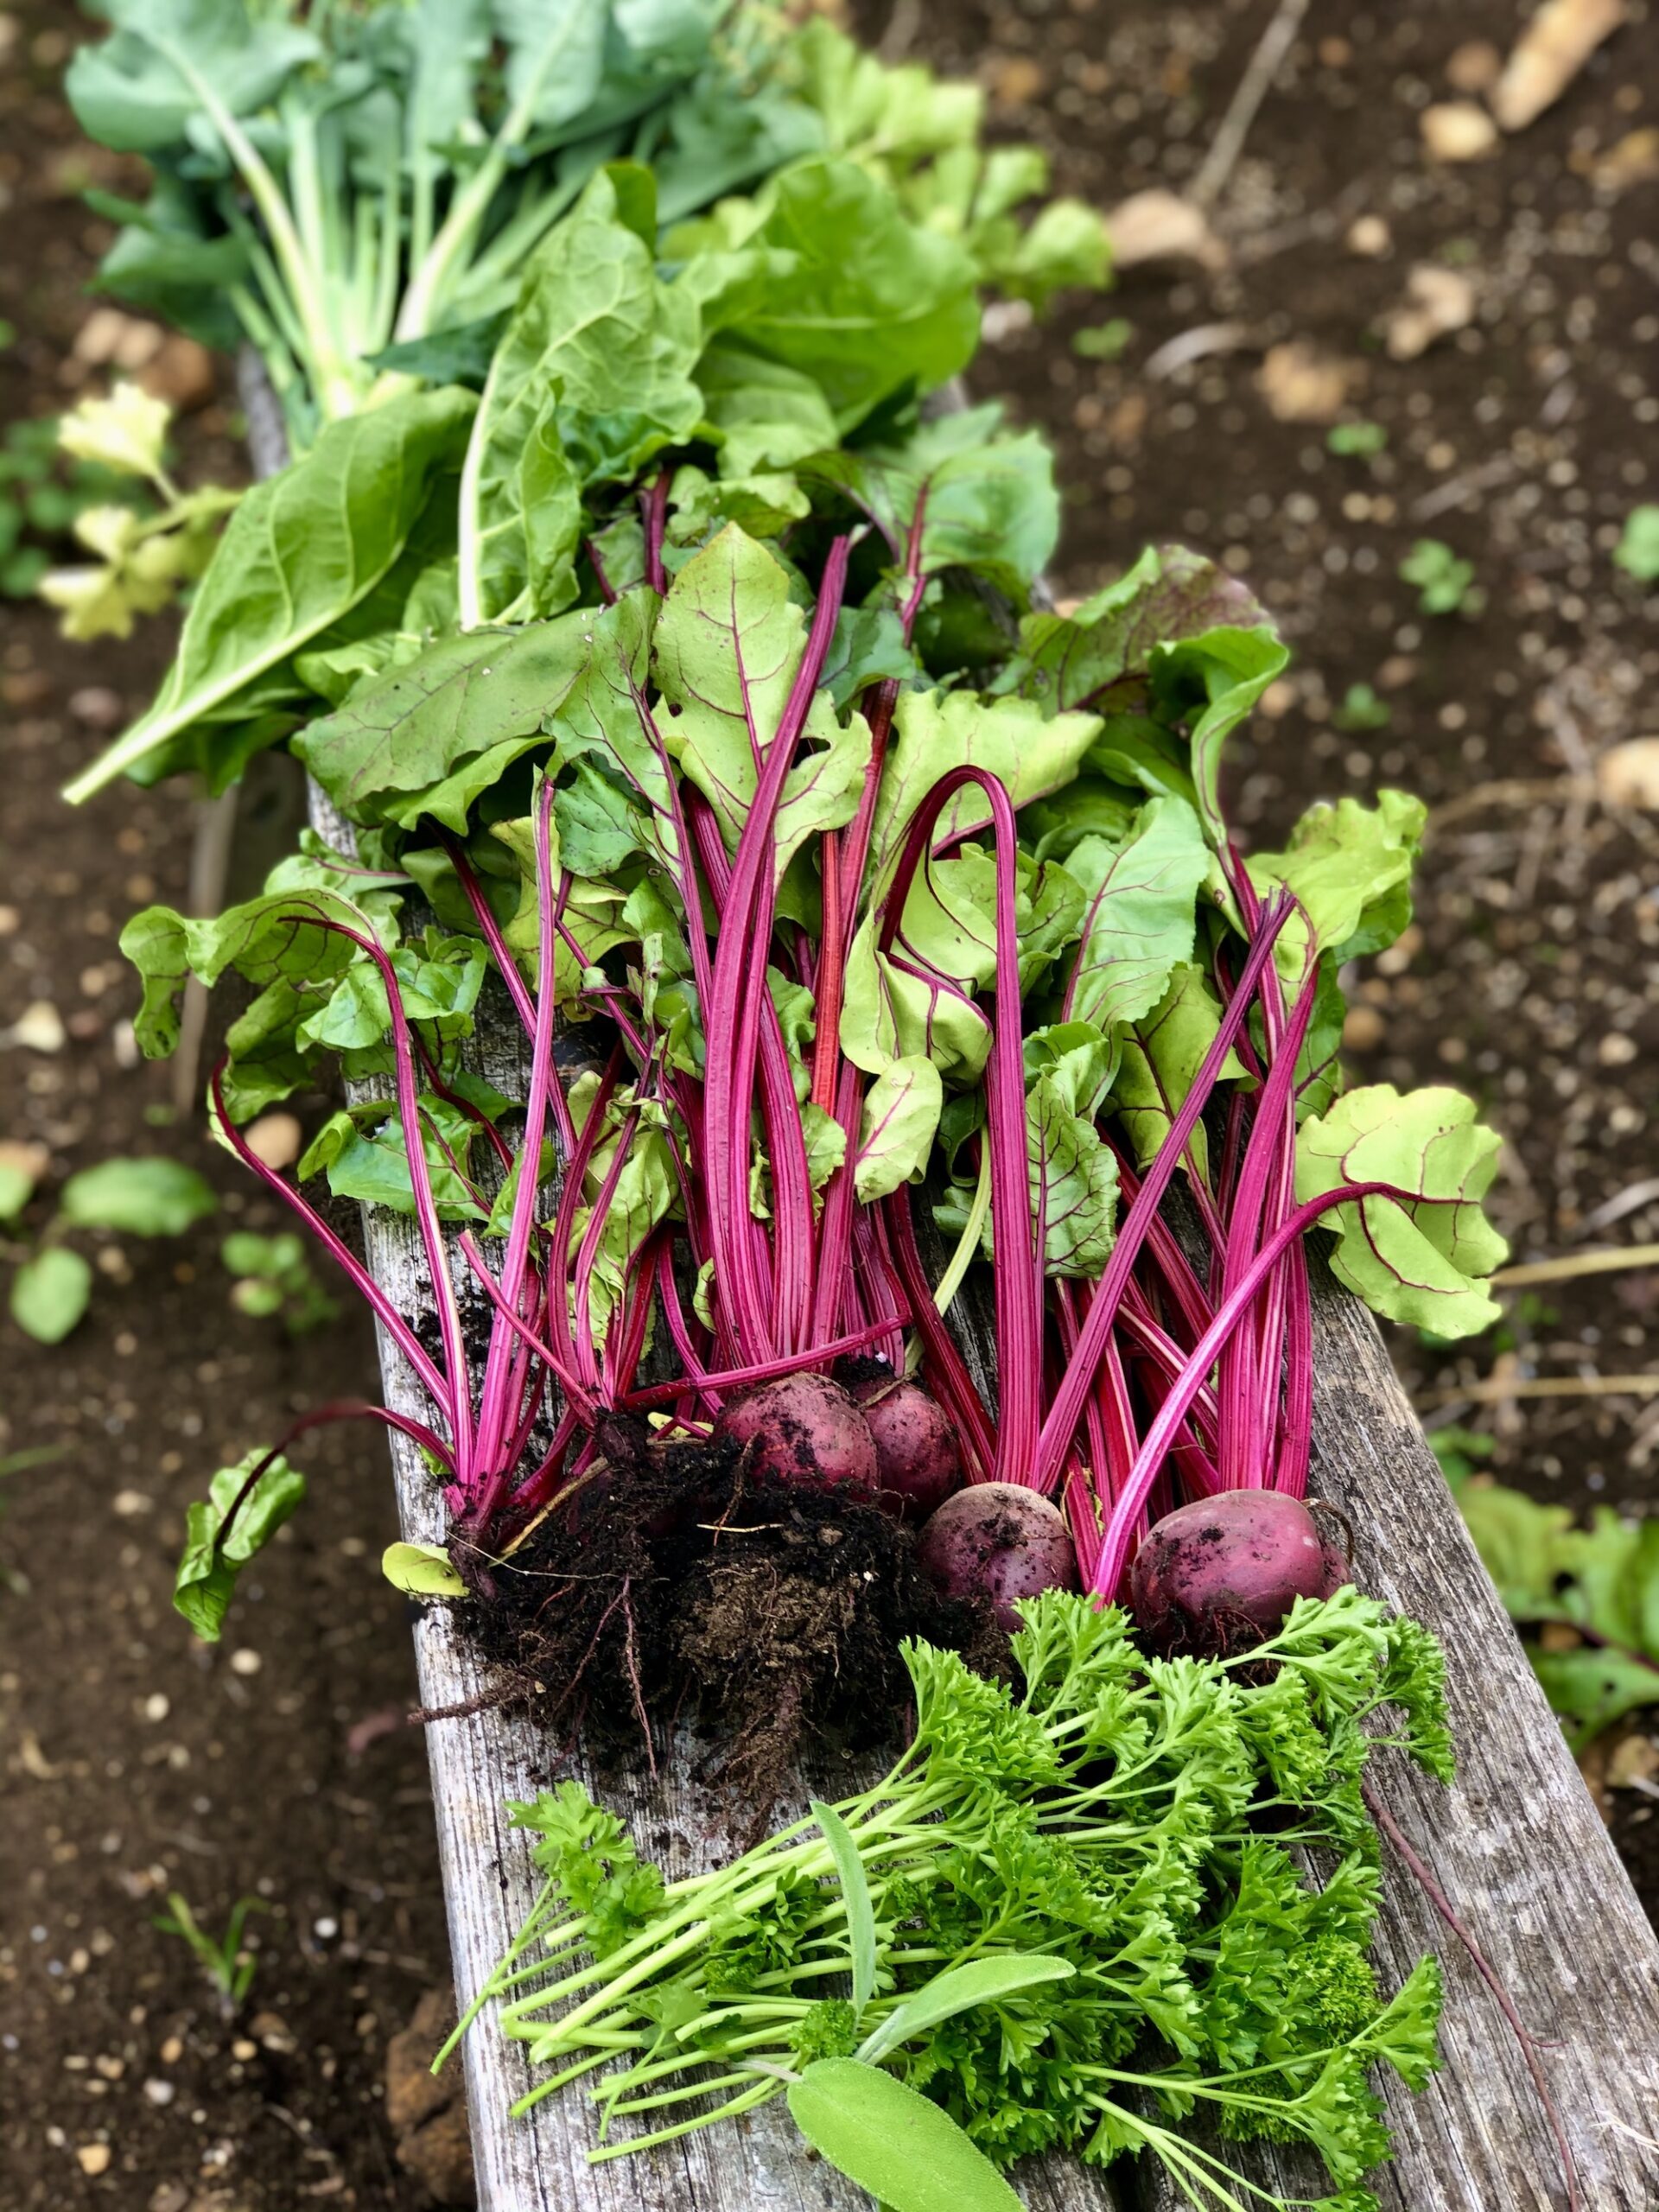 Vibrant pink beetroot and parsley harvested from productive garden 